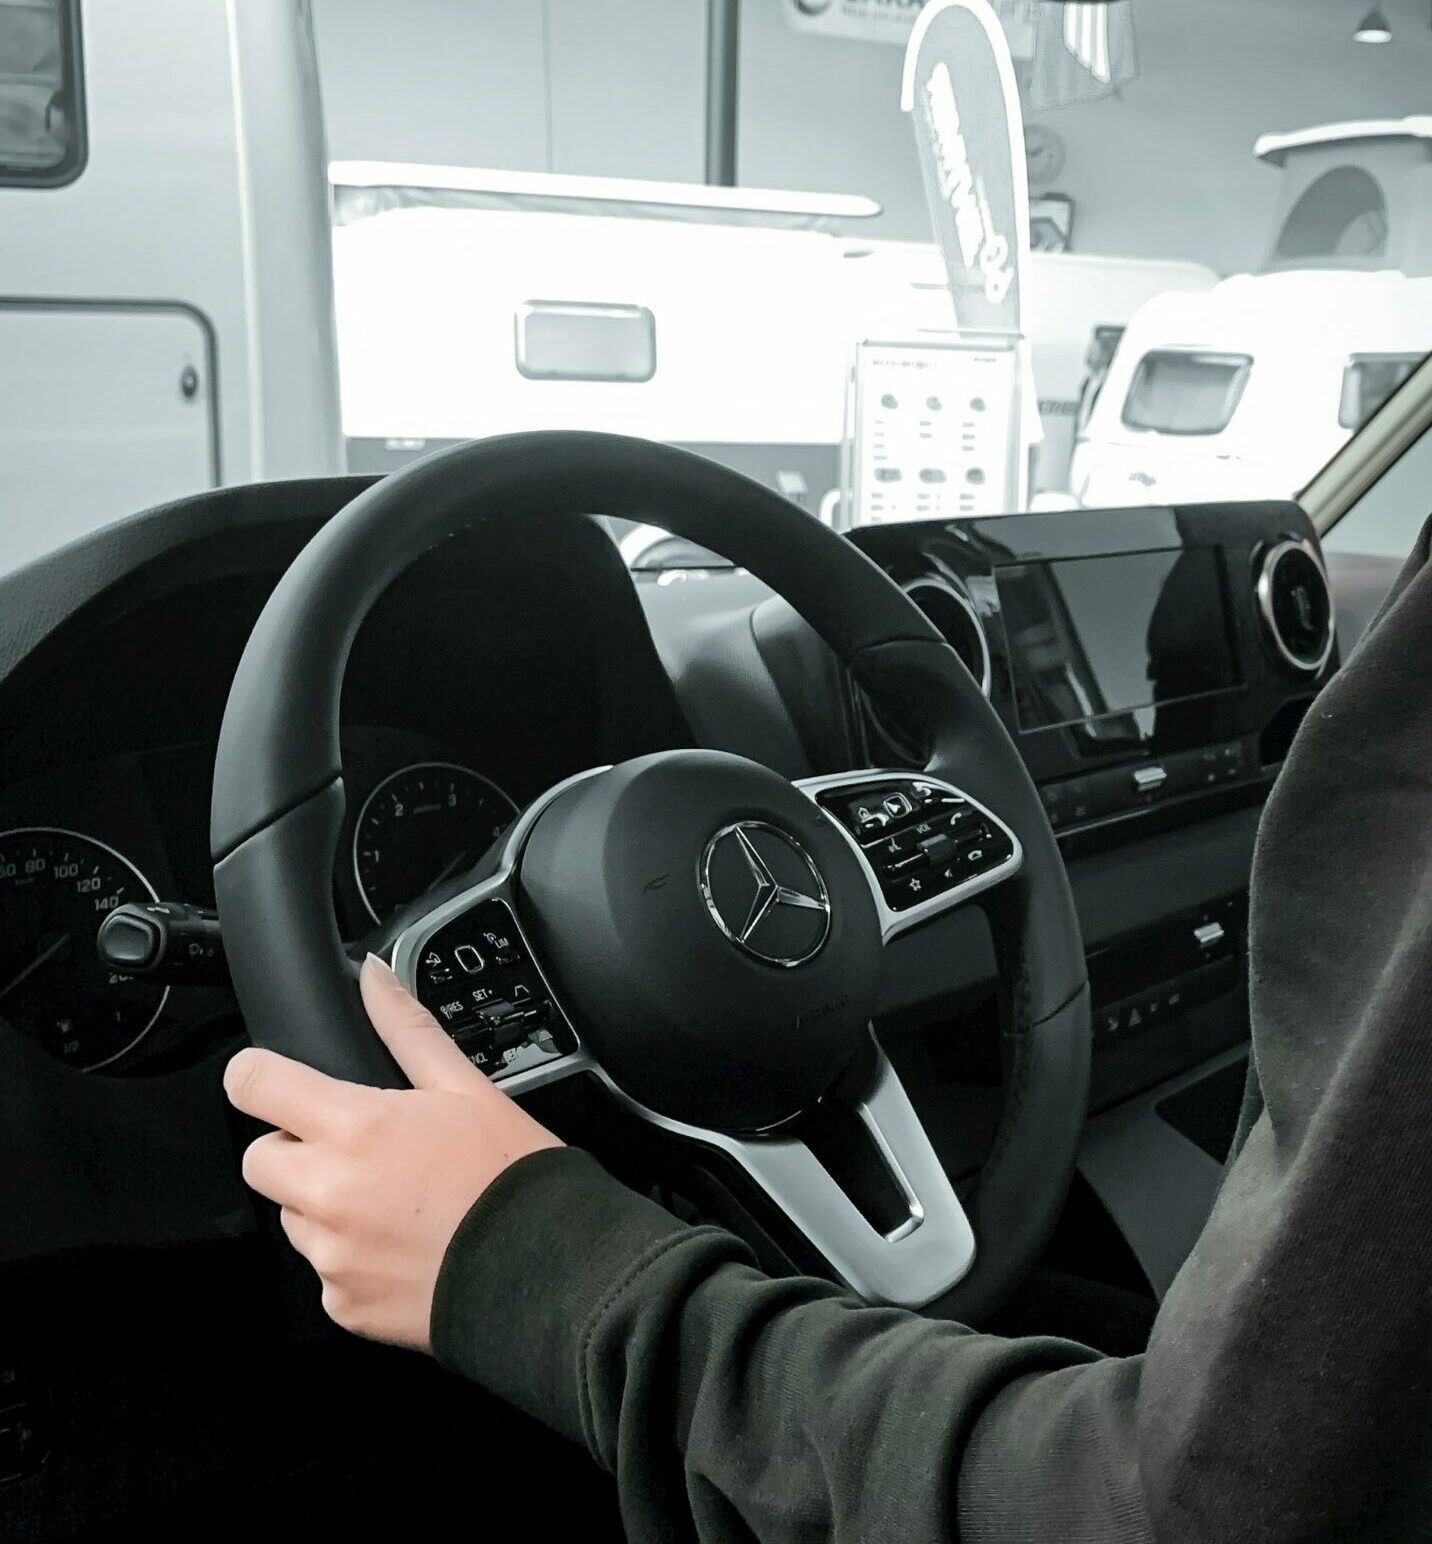 What Causes a Sprinter Van to Go into Limp Mode? Understanding This Protective Mercedes Setting